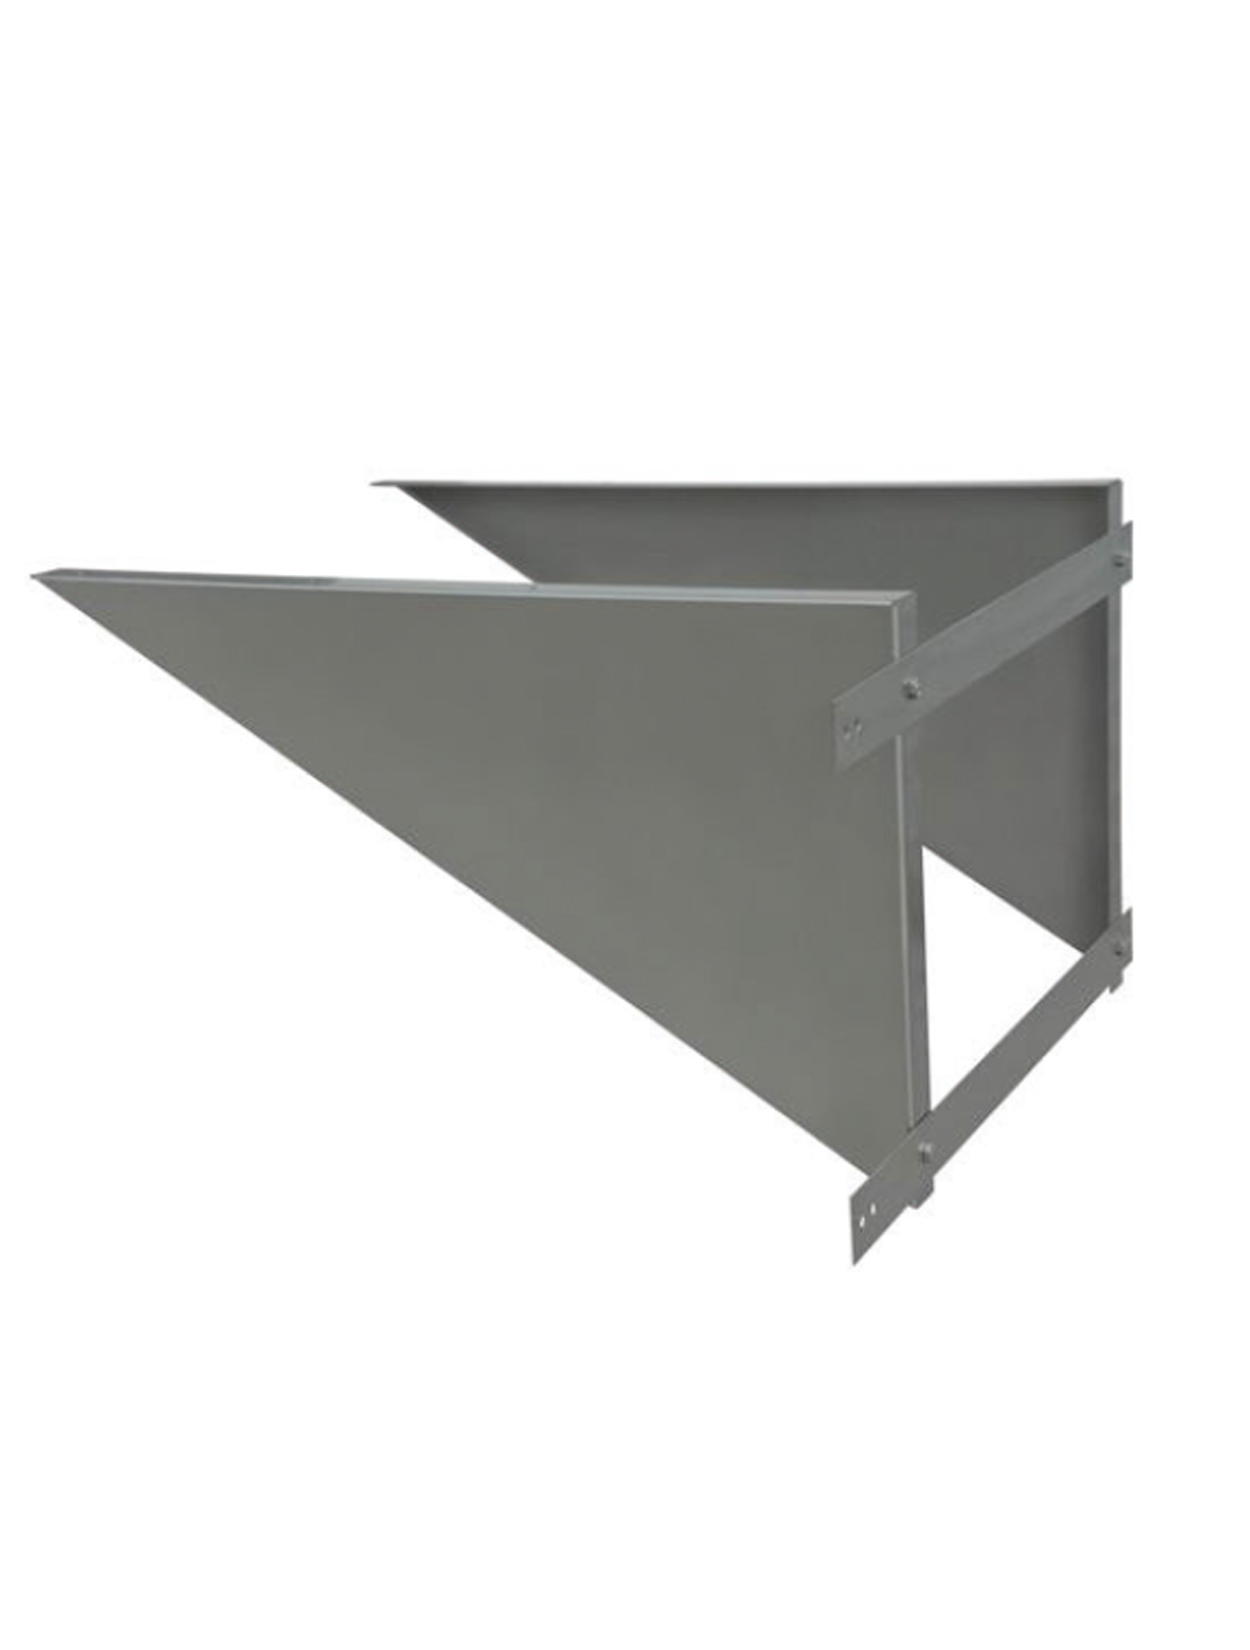 Wall bracket assembly for JET Series corrosion resistant fans, blowers, hoods, and ventilation